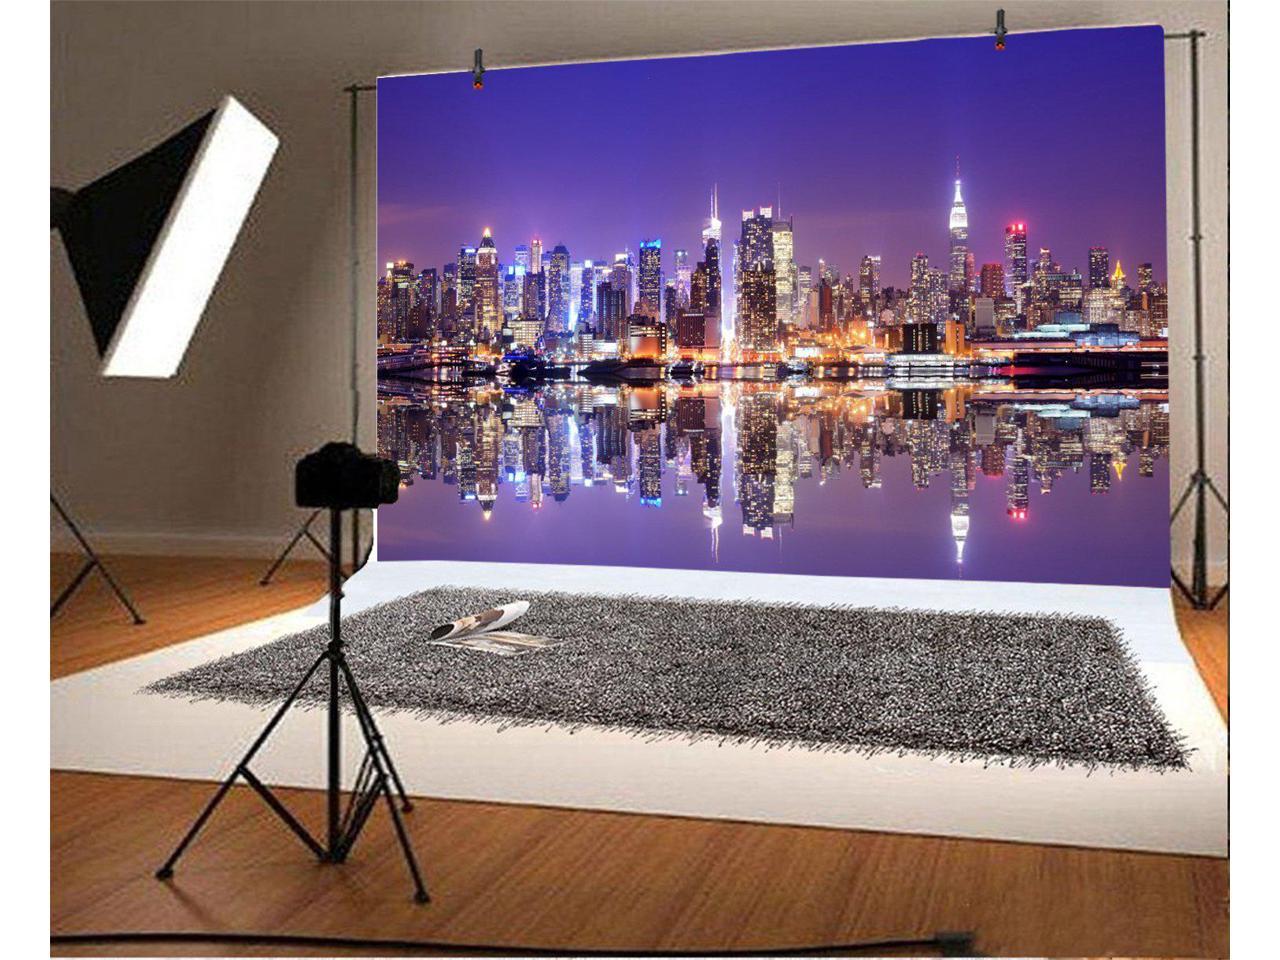 5x5FT Vinyl Wall Photography Backdrop,Landscape,New York City Skyline Background for Baby Birthday Party Wedding Studio Props Photography 